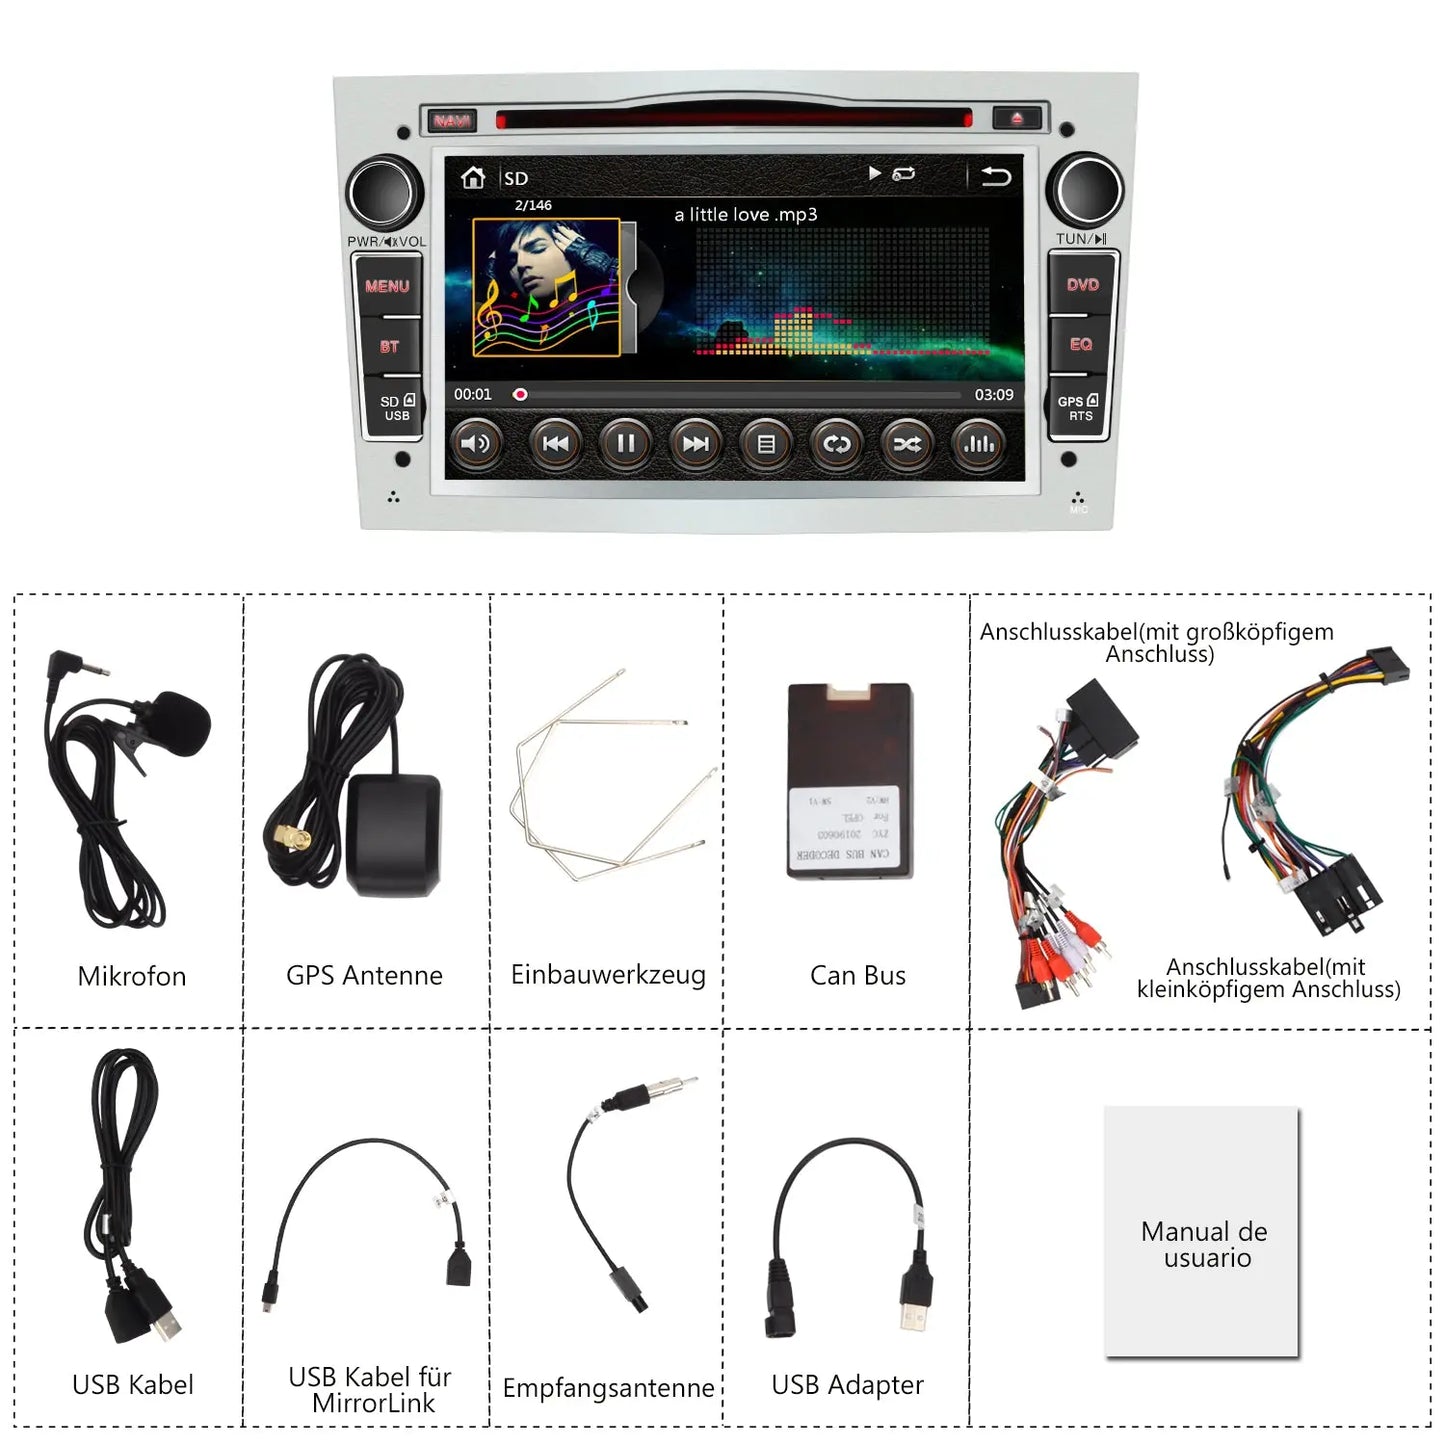 AWESAFE Car Radio 7 Inch with 2 DIN Touch Screen for Opel, Opel Autoradio with Bluetooth/GPS/FM/RDS/CD DVD/USB/SD, Support Steering Wheel Controls, Mirrorlink and Parking （white） AWESAFE